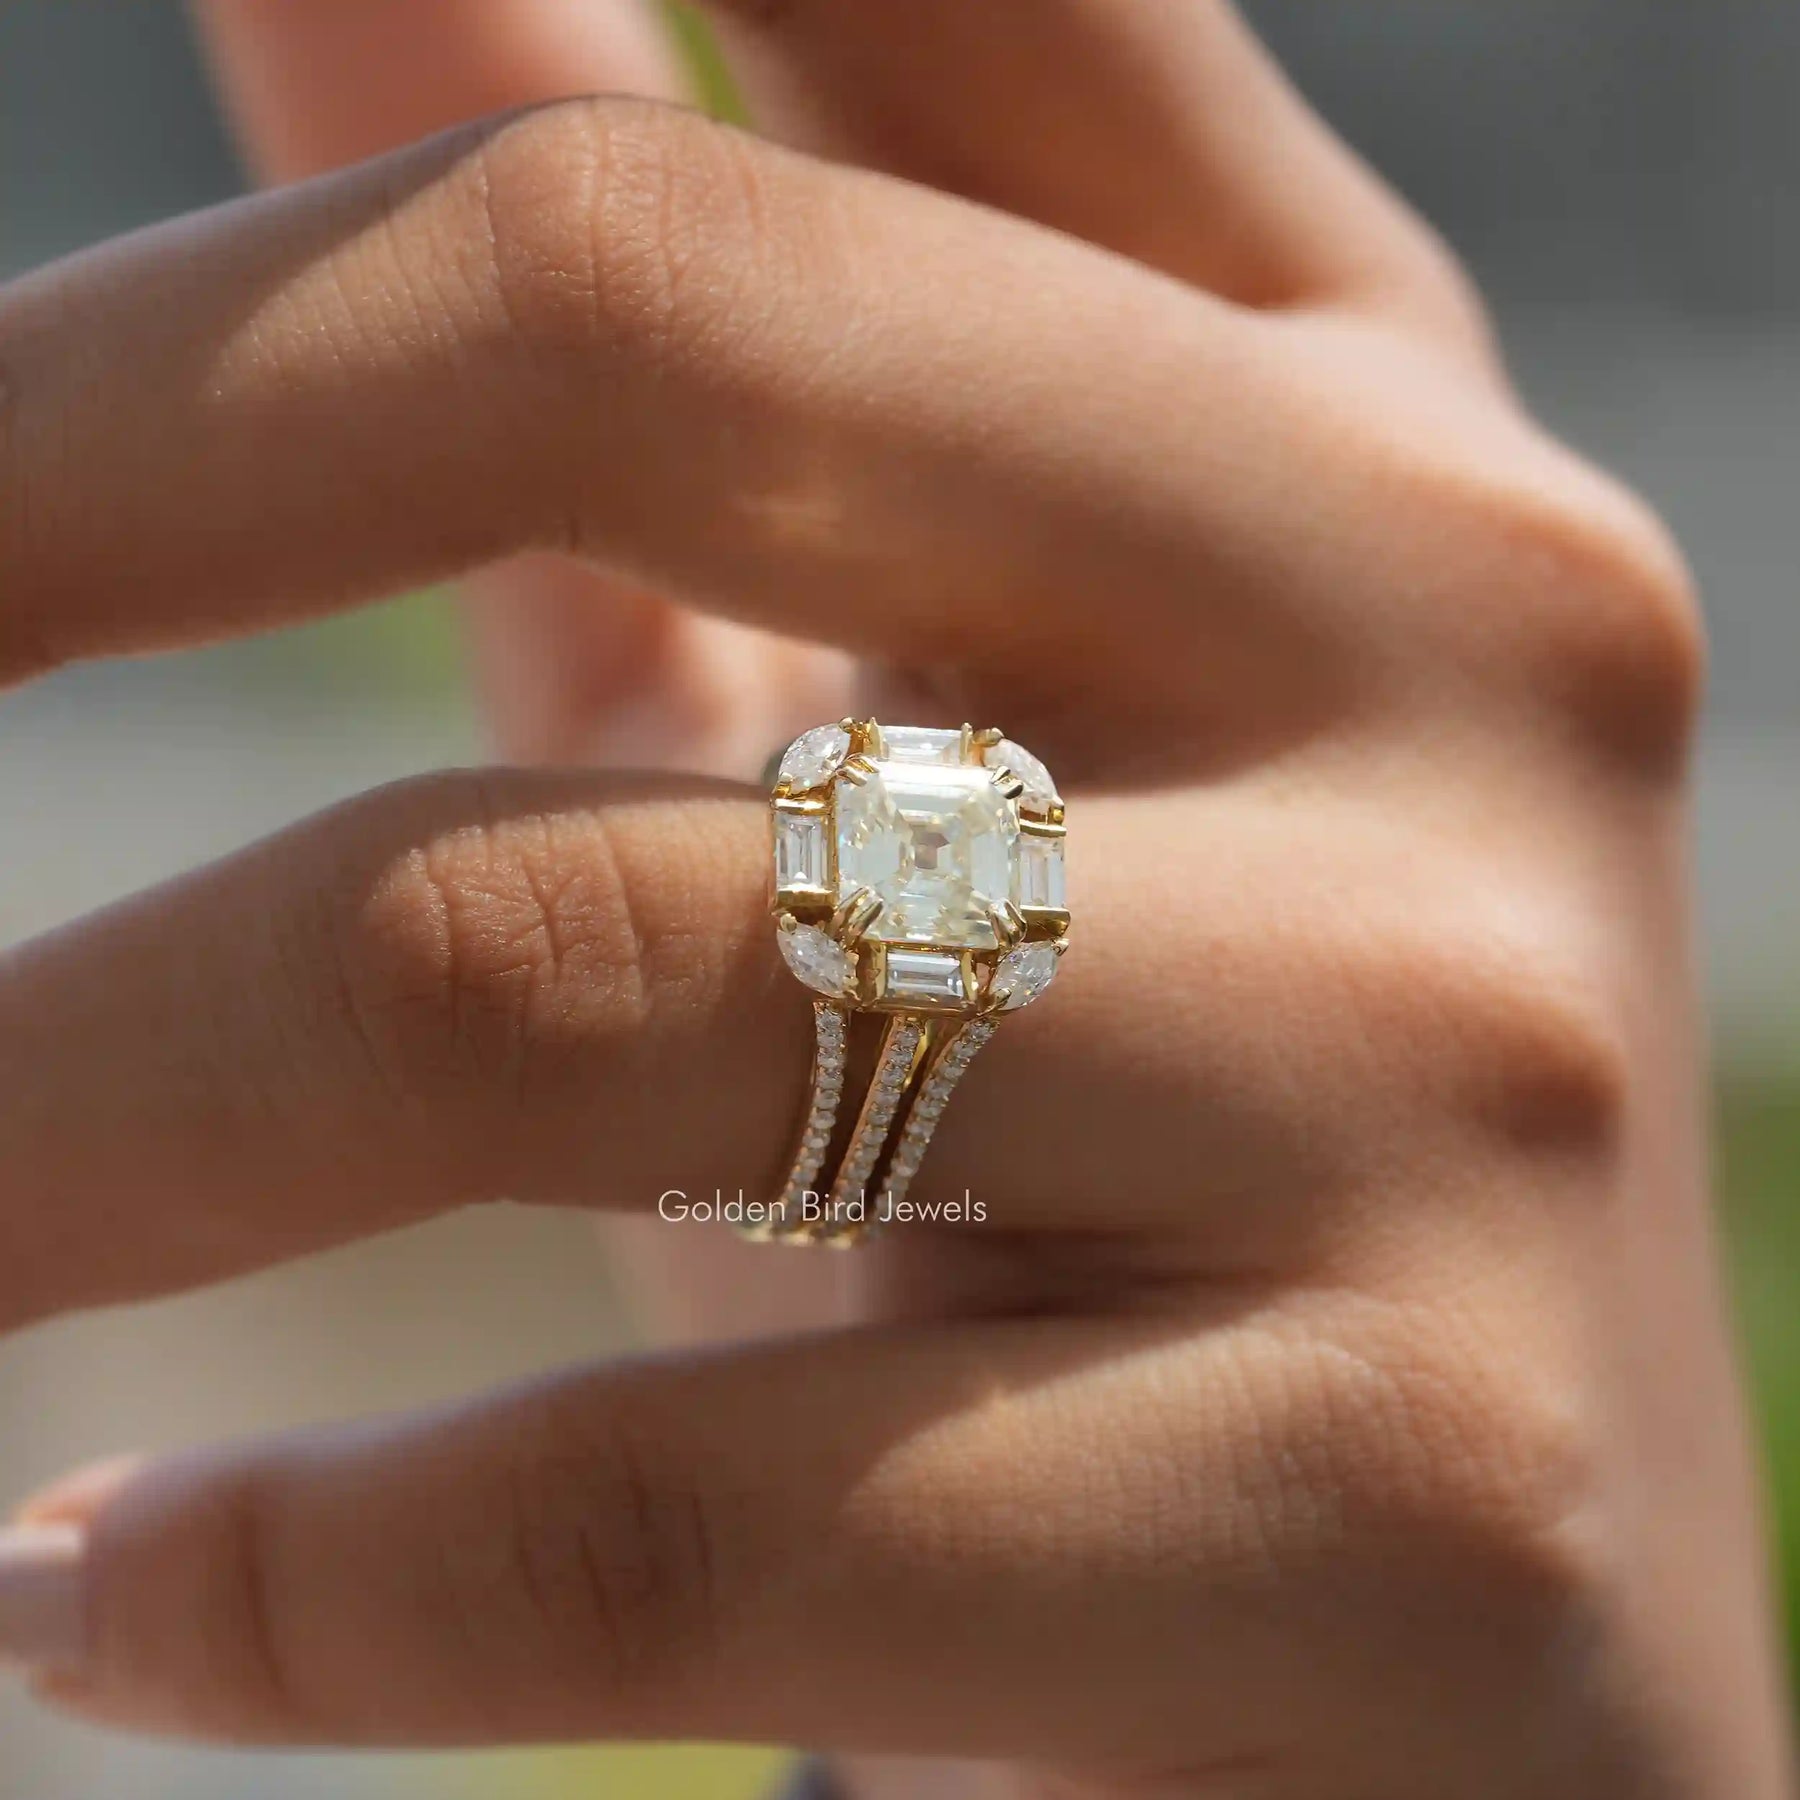 [This moissanite old mine asscher cut ring made of side marquise & baguette cut stones]